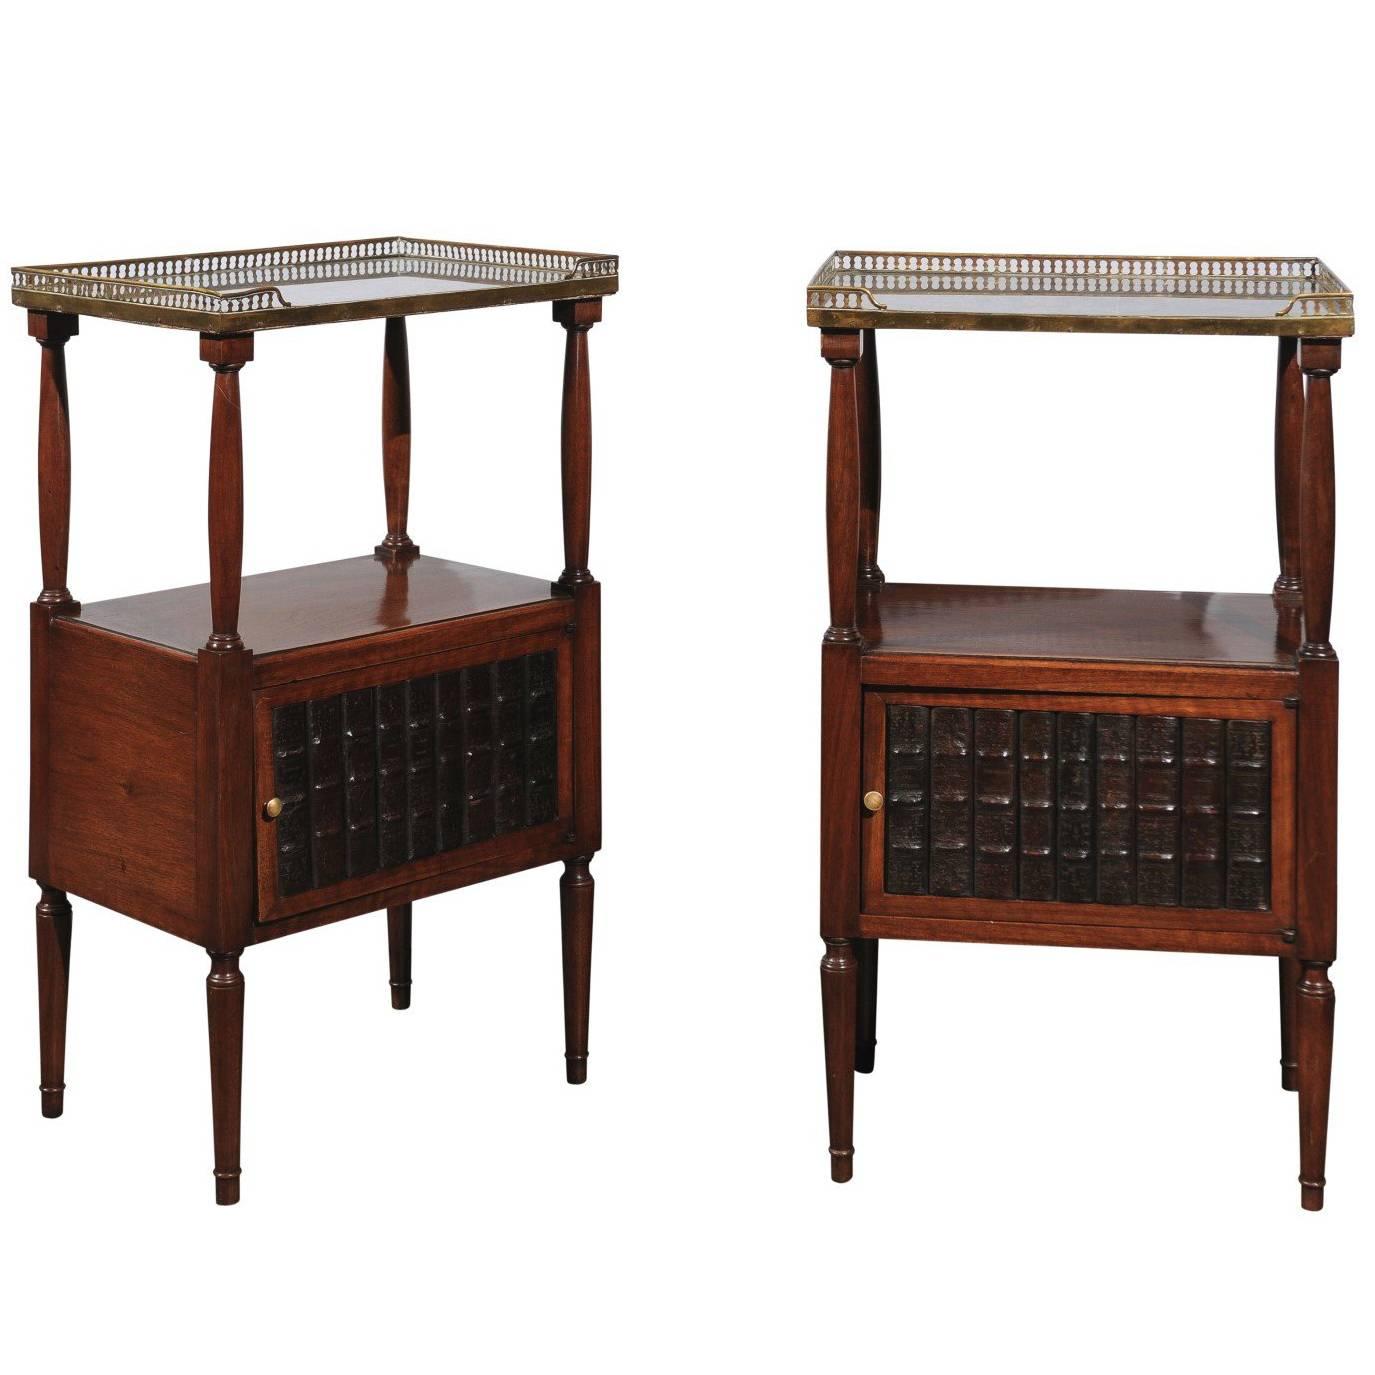 Pair of English Turn of the Century Mahogany Side Tables with Faux Book Doors